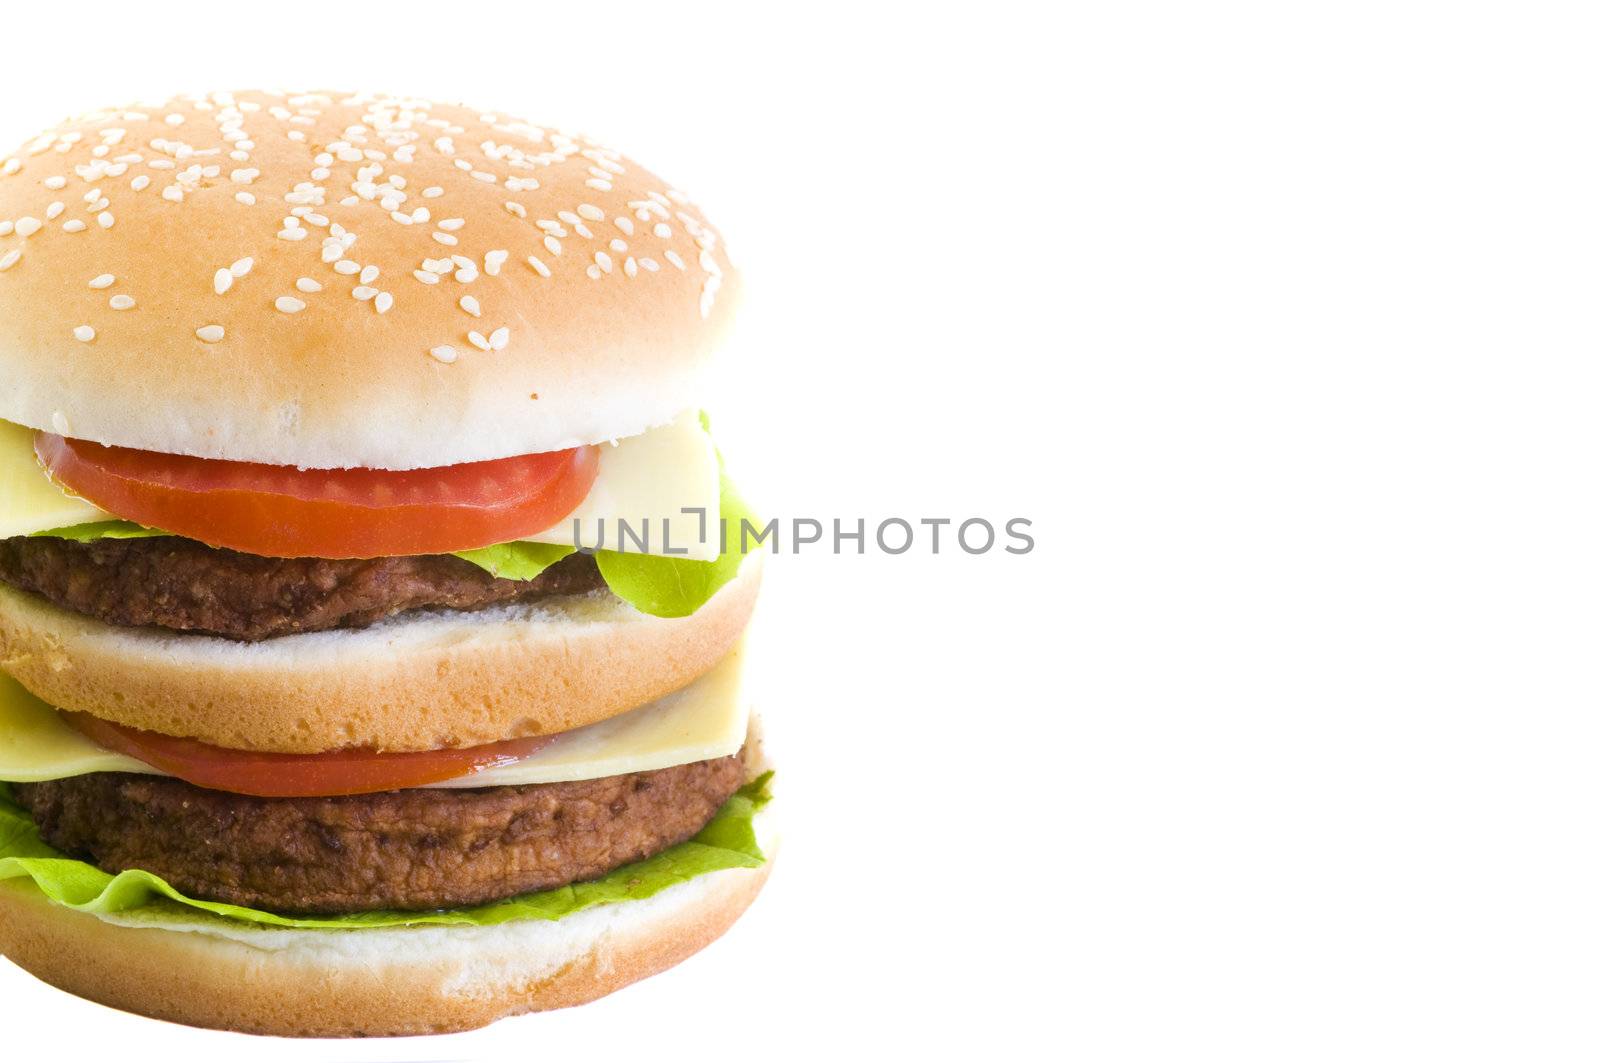 huge burger by no4aphoto